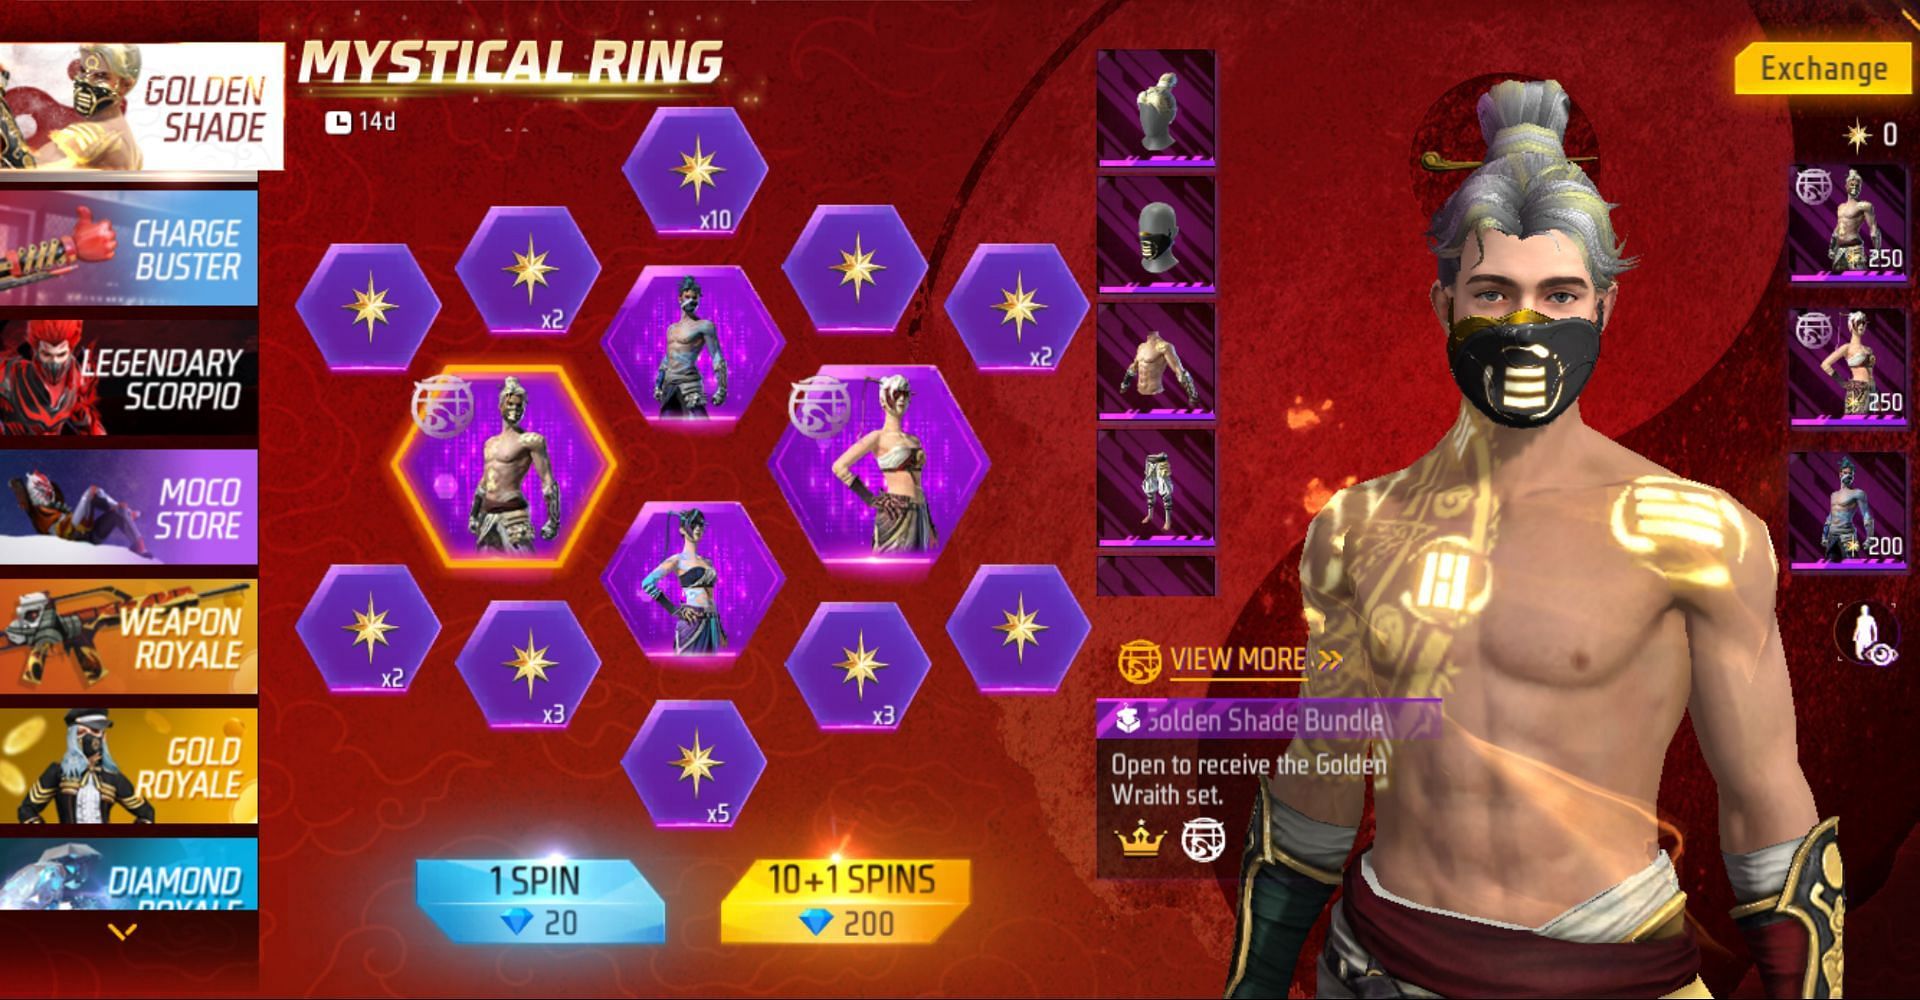 New Mystical Ring Luck Royale has started in Free Fire MAX (Image via Garena)